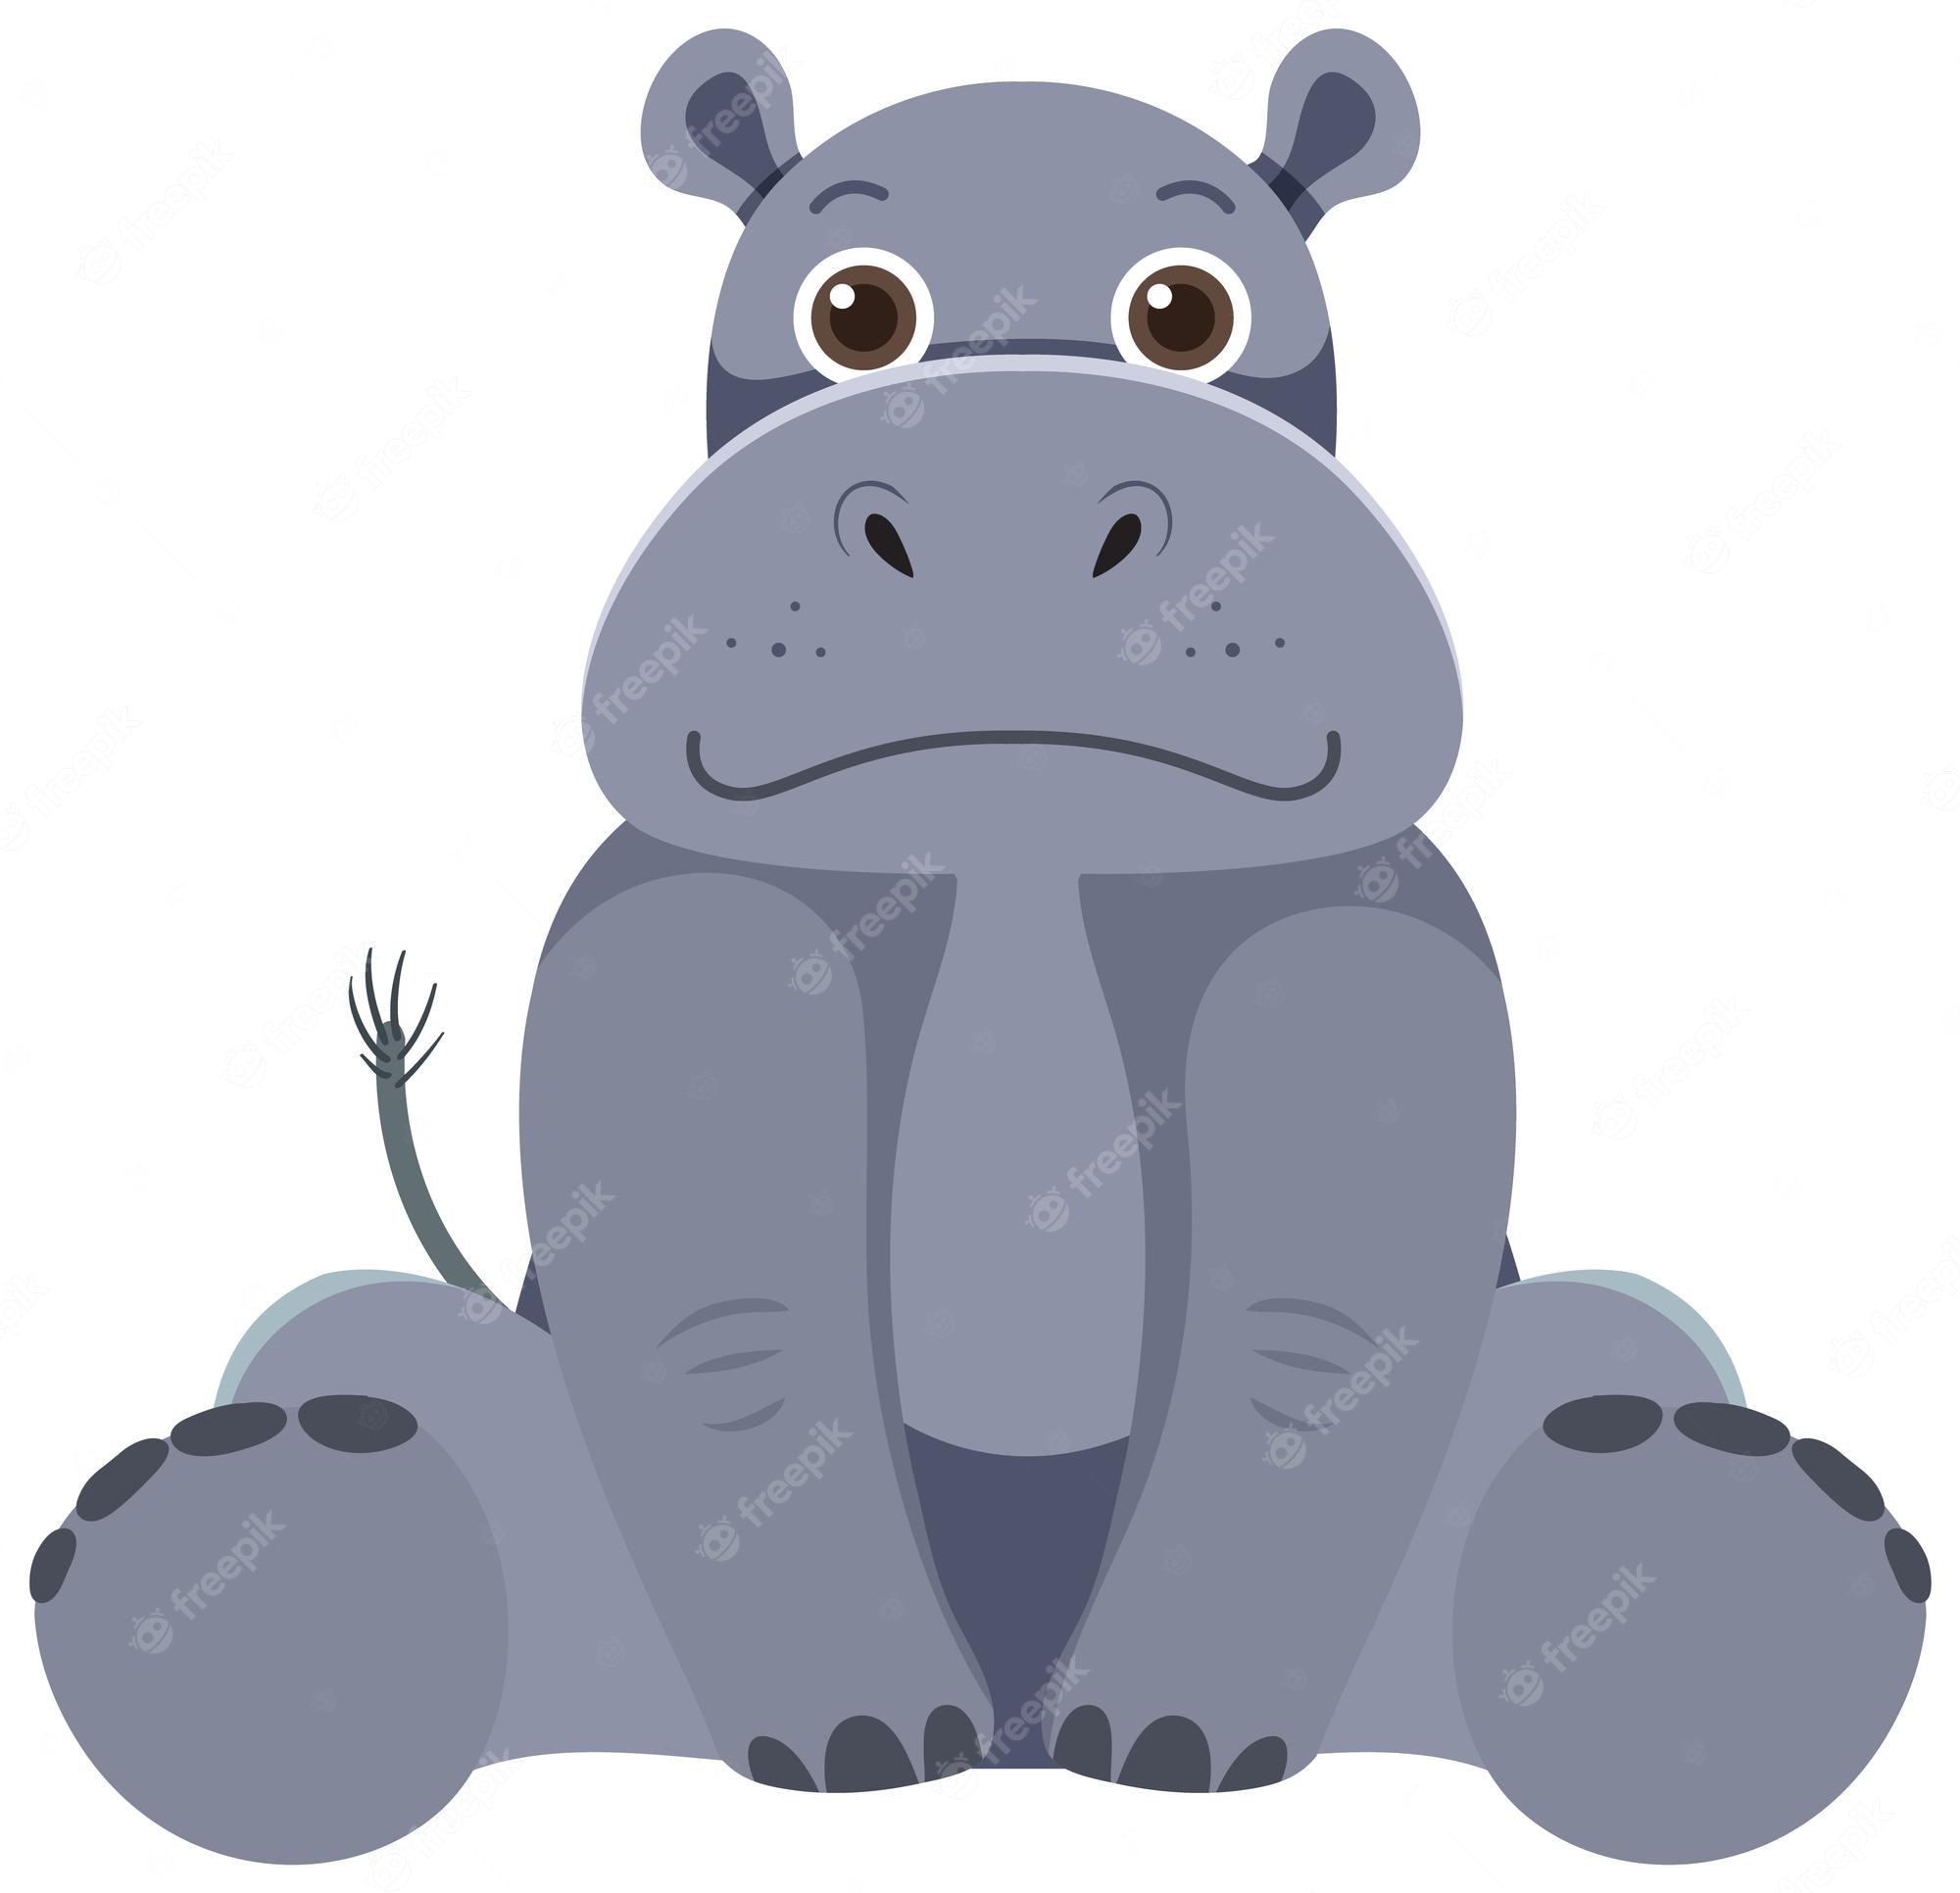 hippo clipart - Google Search | Cute animal drawings, Animal - Clip Art ...